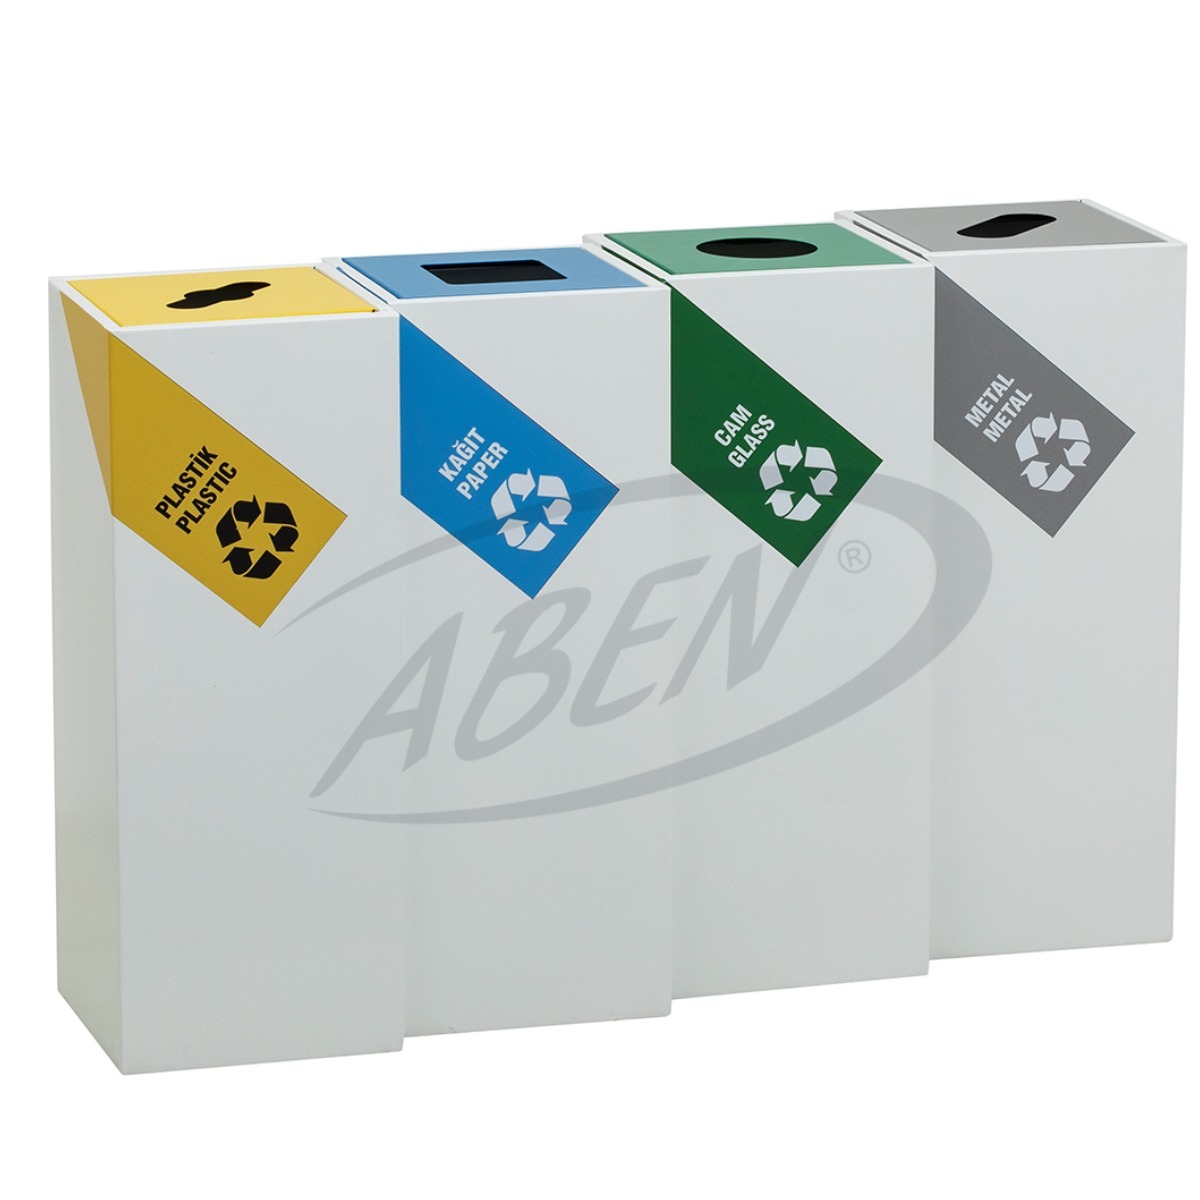 AB-726 4’Part Recycle Bin